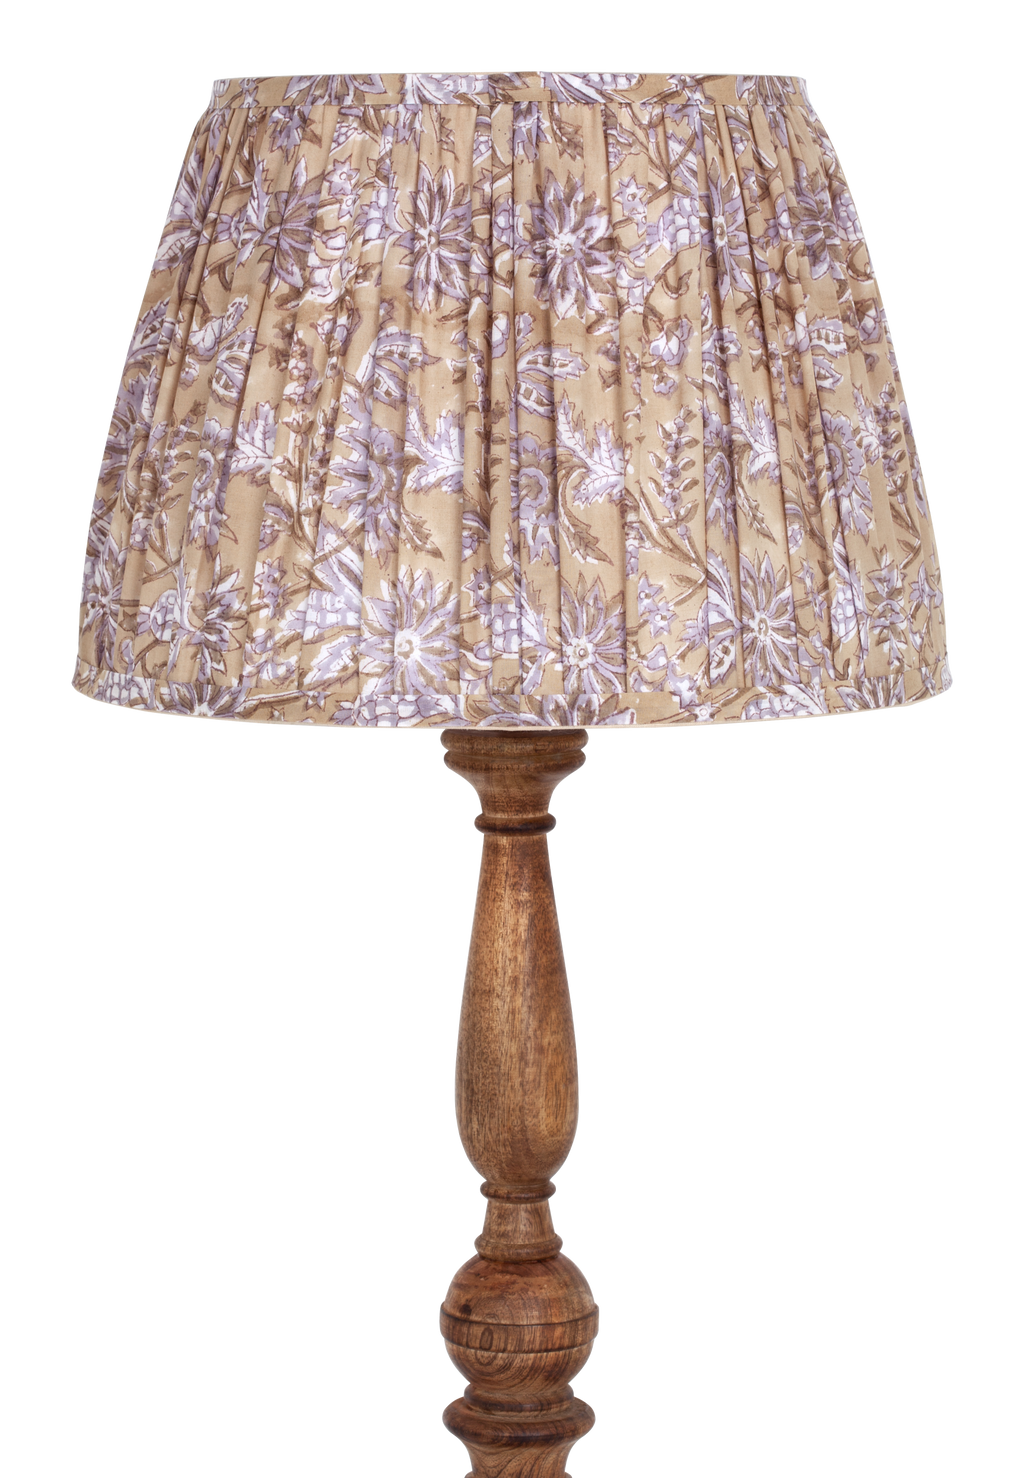 Lampshade with Indian Summer print in Beige/Lavender - Large